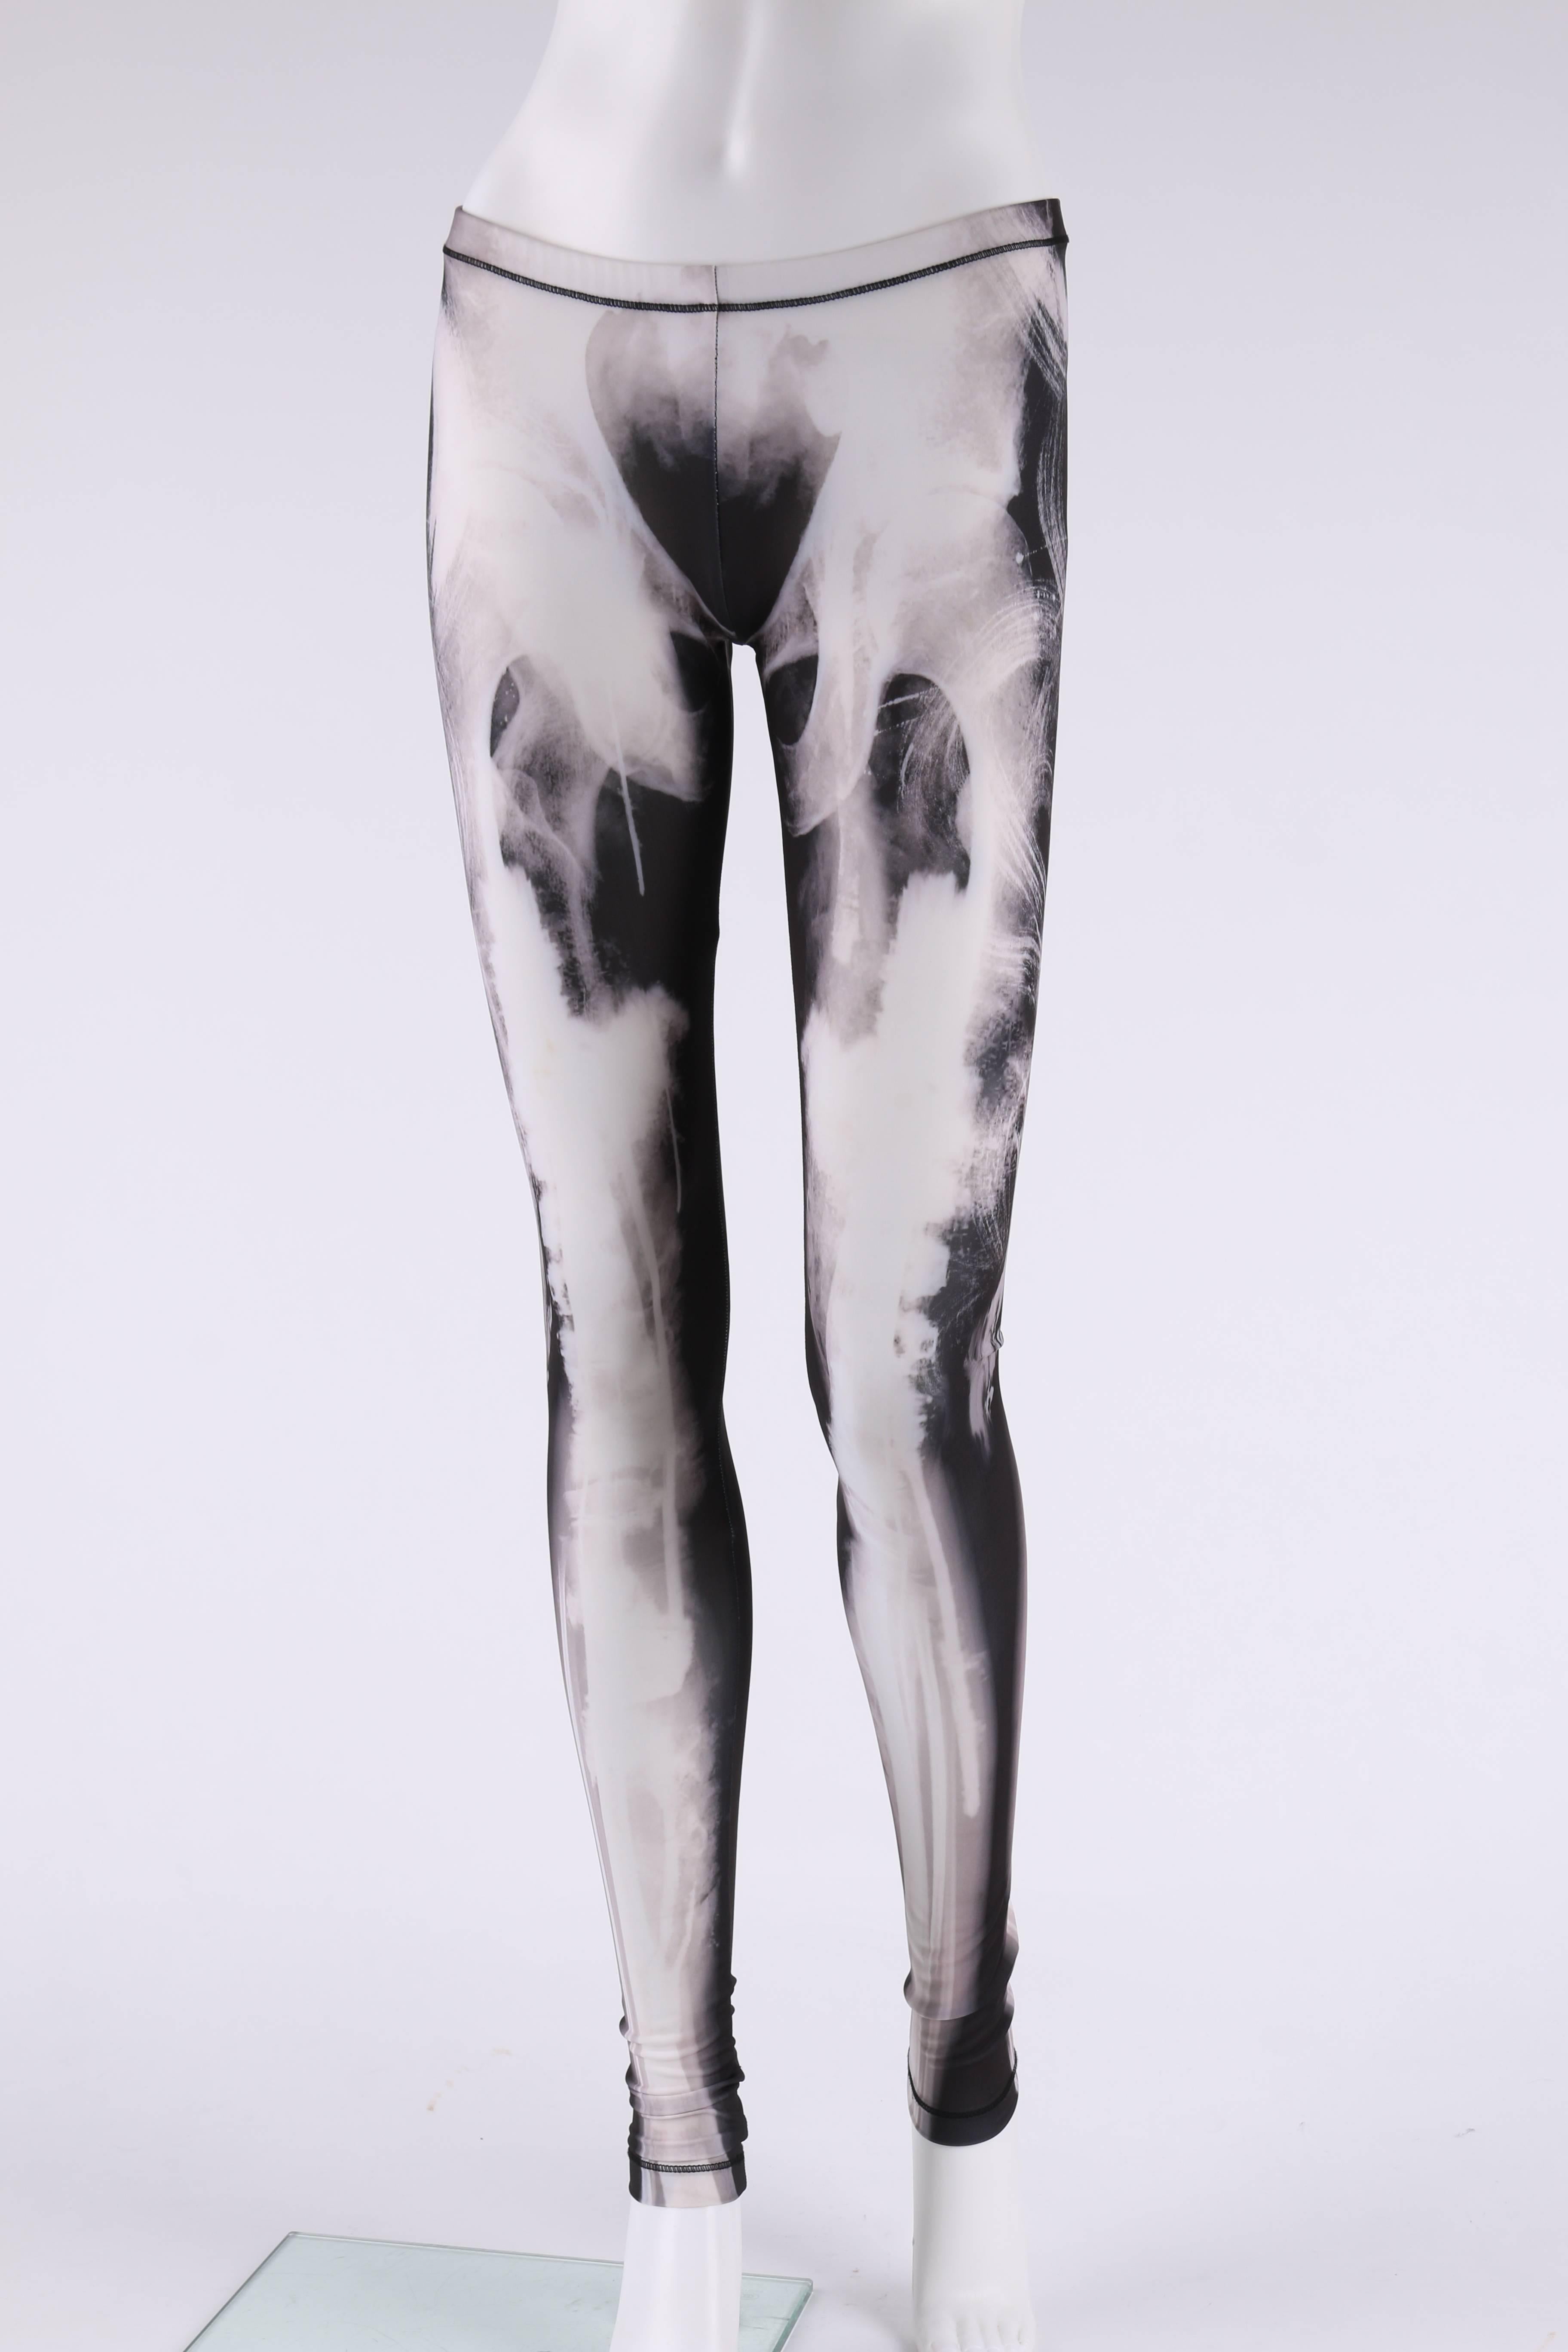 ALEXANDER MCQUEEN McQ c.2012 Black White X Ray Print Skeleton Leggings Pants In Good Condition For Sale In Thiensville, WI